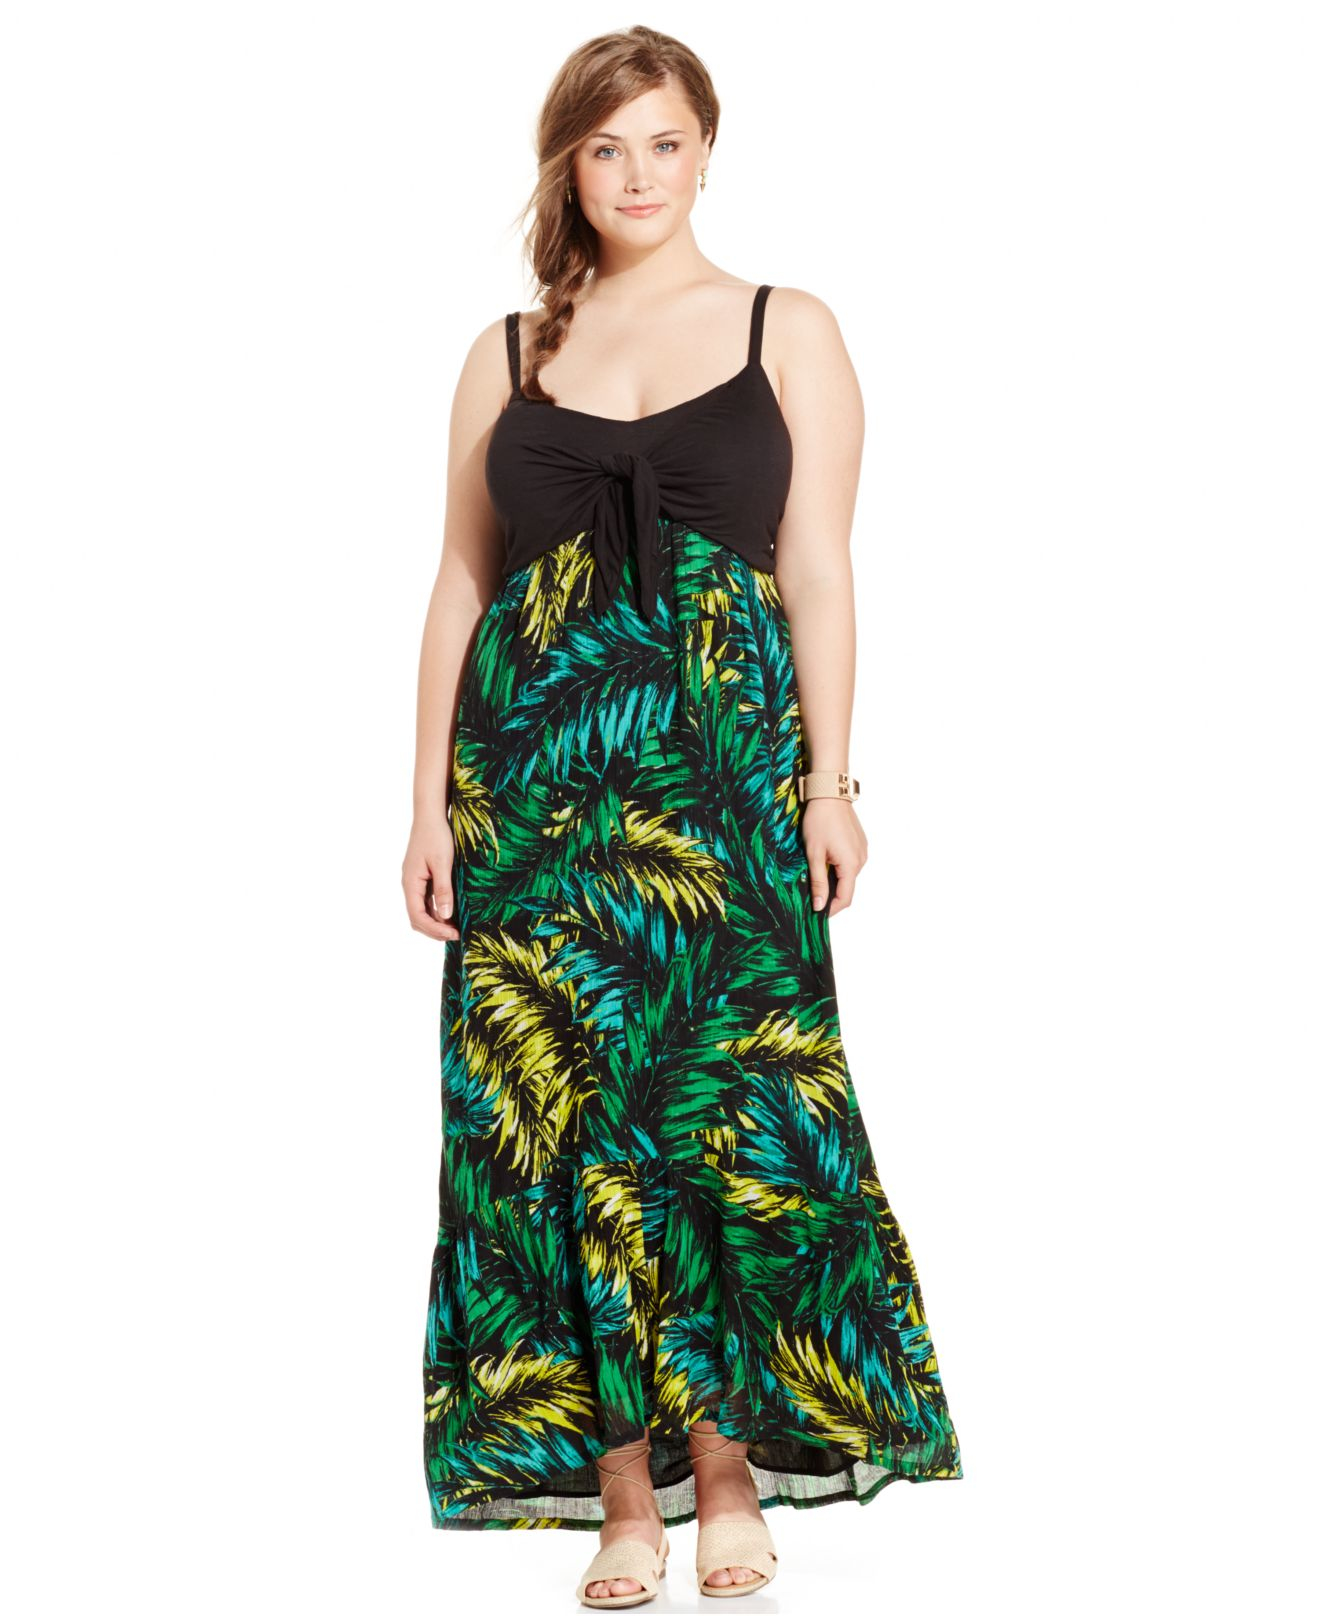 Lyst - Jessica Simpson Plus Size Eliana Tie-front Printed Maxi Dress in ...